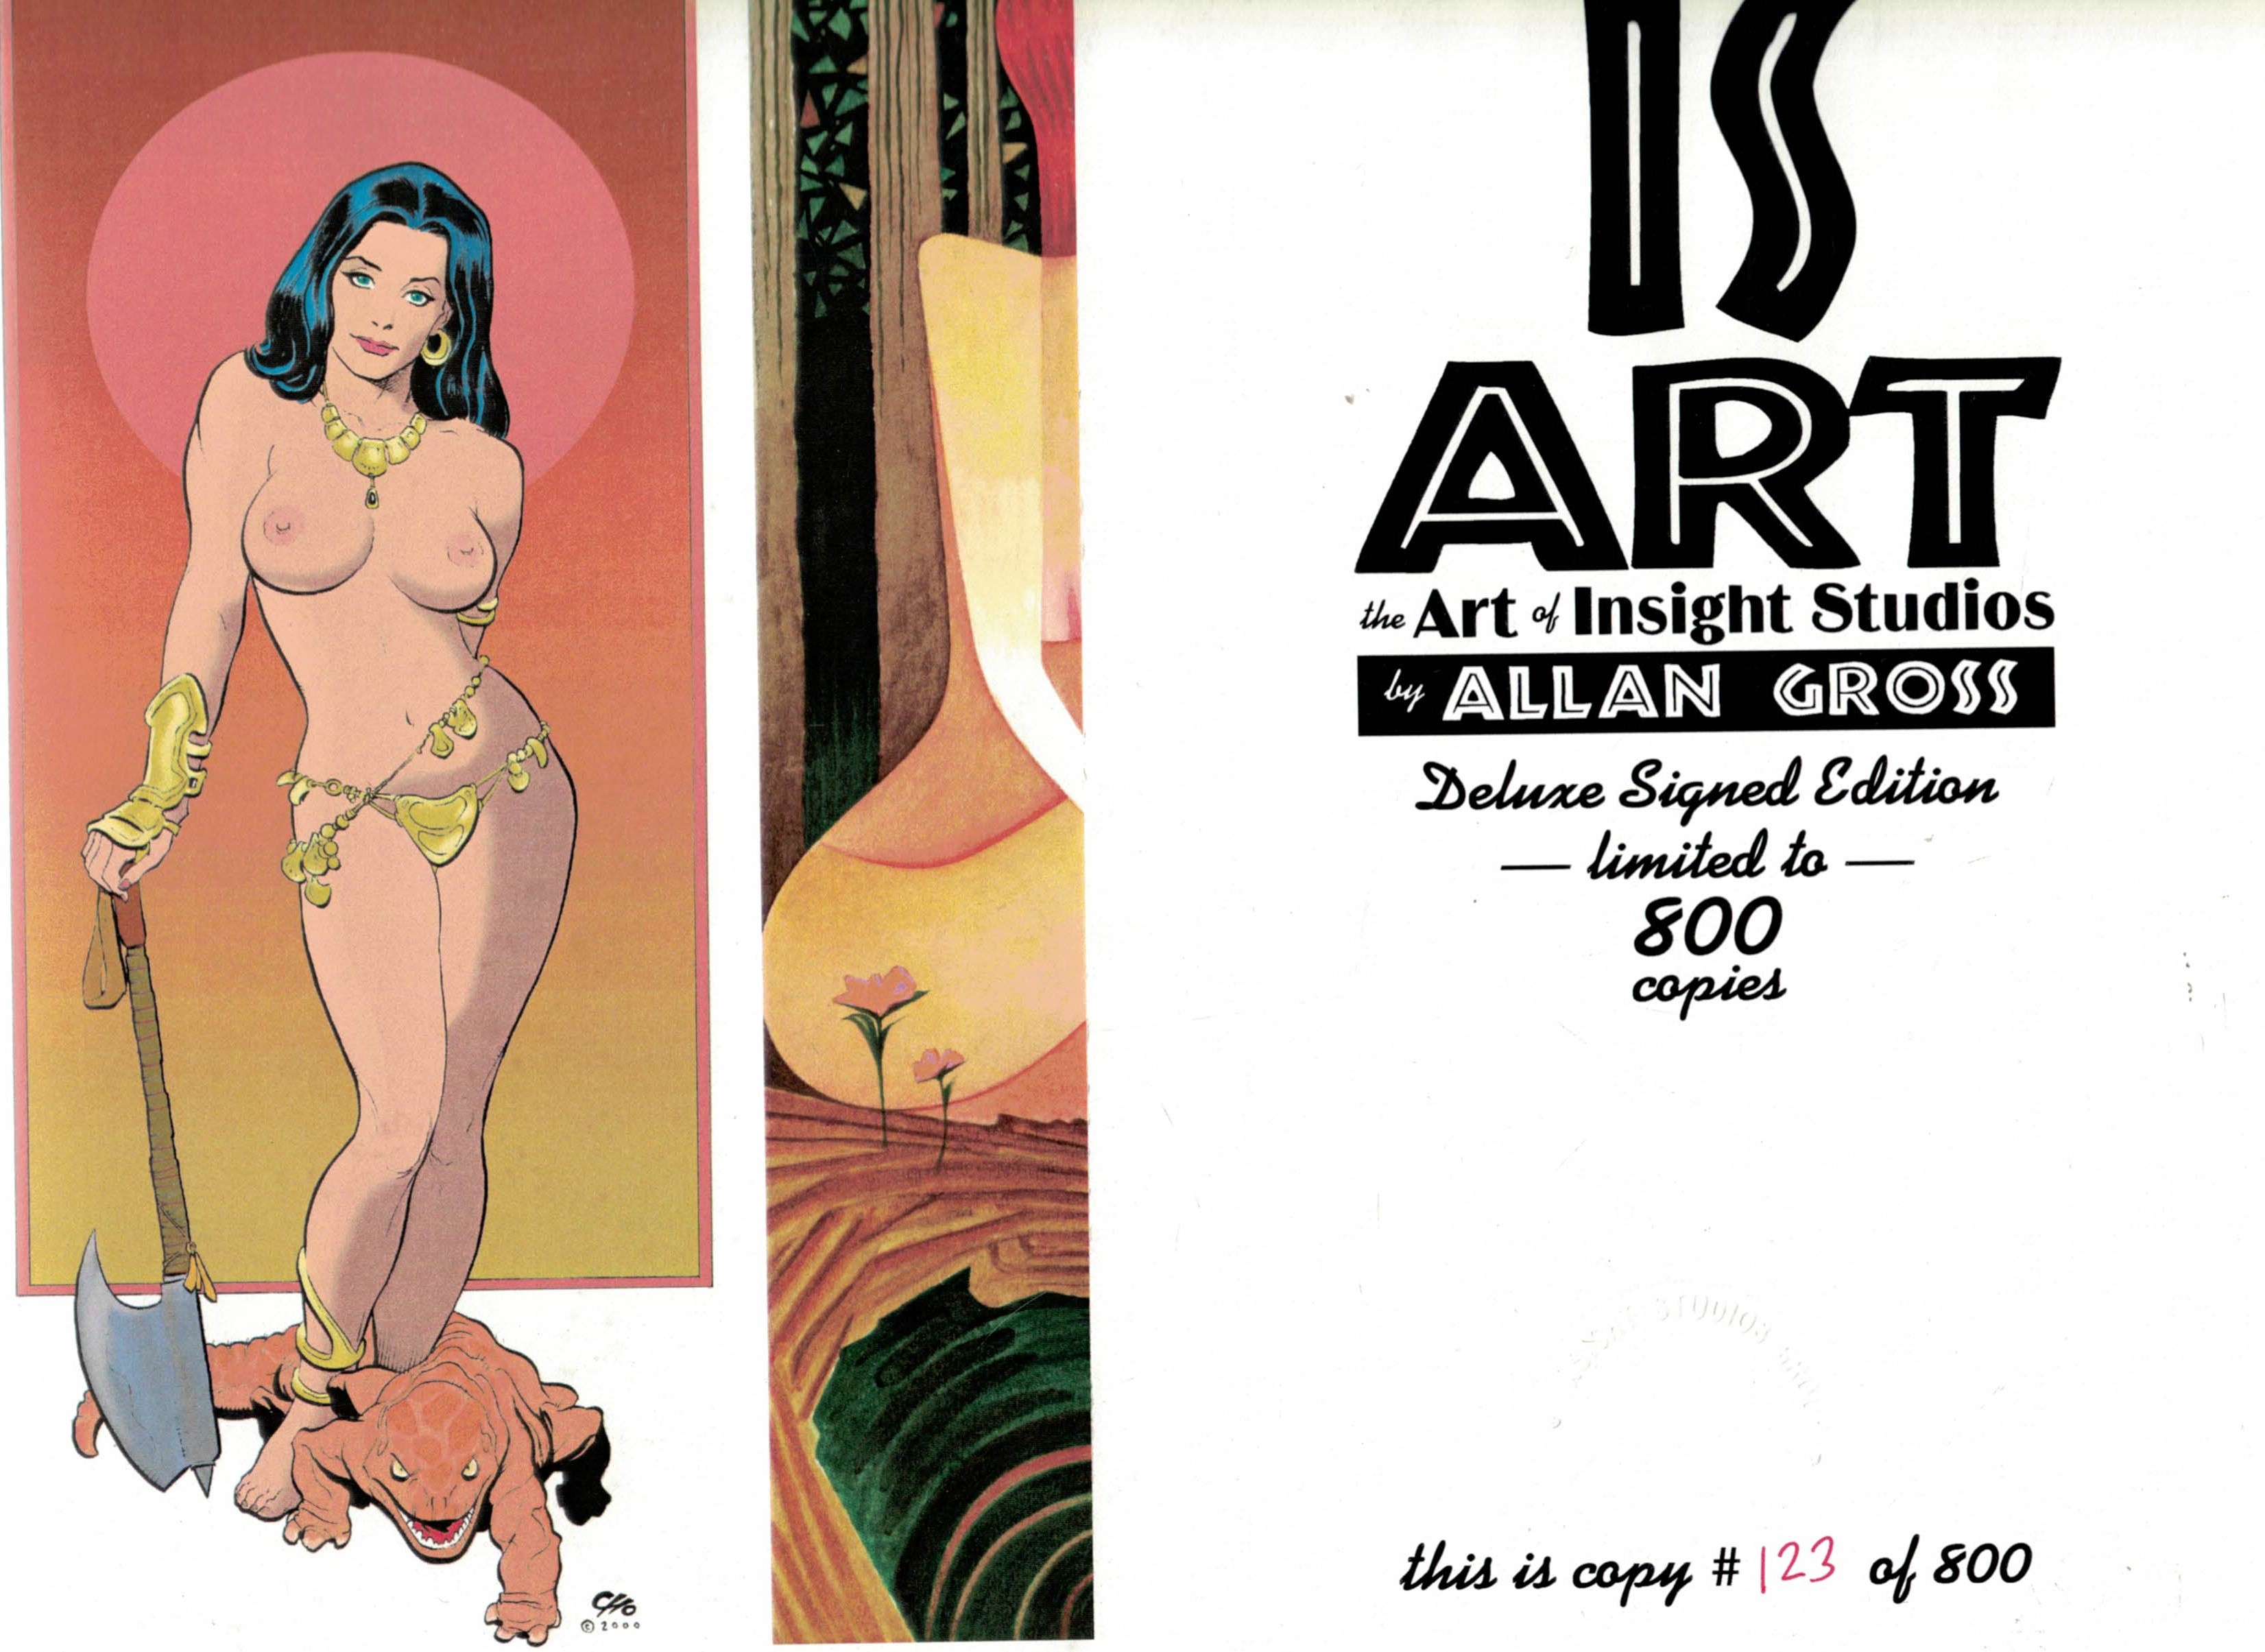 IS Art. The Art of Insight Studios. Deluxe signed edition.